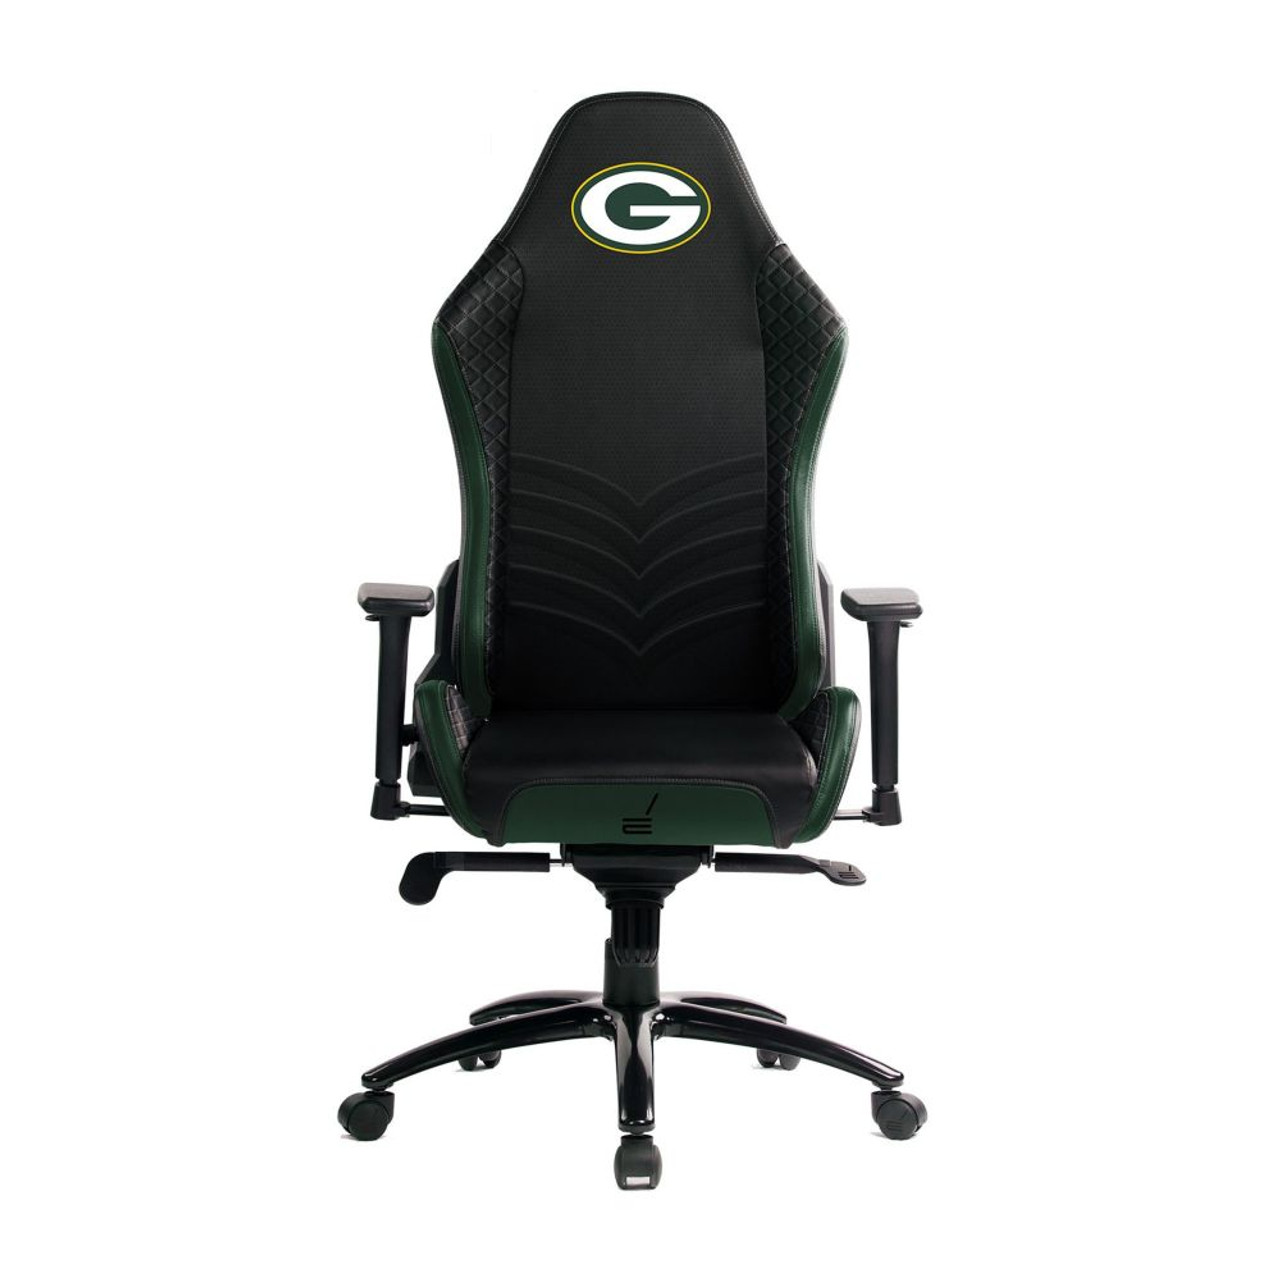 620-1001, Green Bay, GB, Packers, React, Pro Series, Gaming, Chair, NFL, Imperial